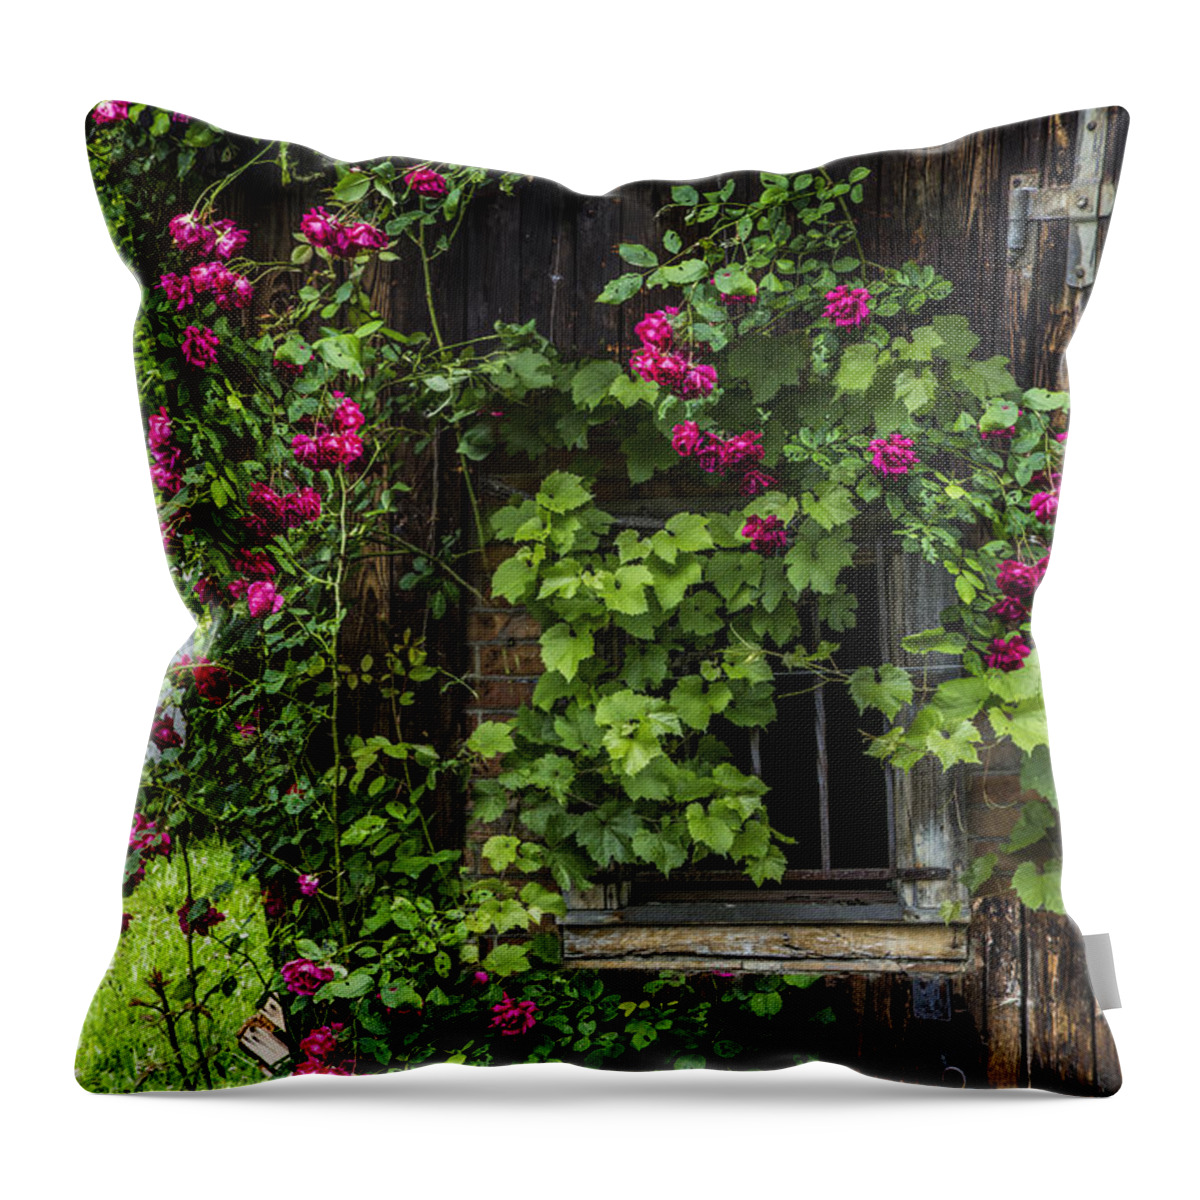 Austria Throw Pillow featuring the photograph The Old Barn Window by Debra and Dave Vanderlaan